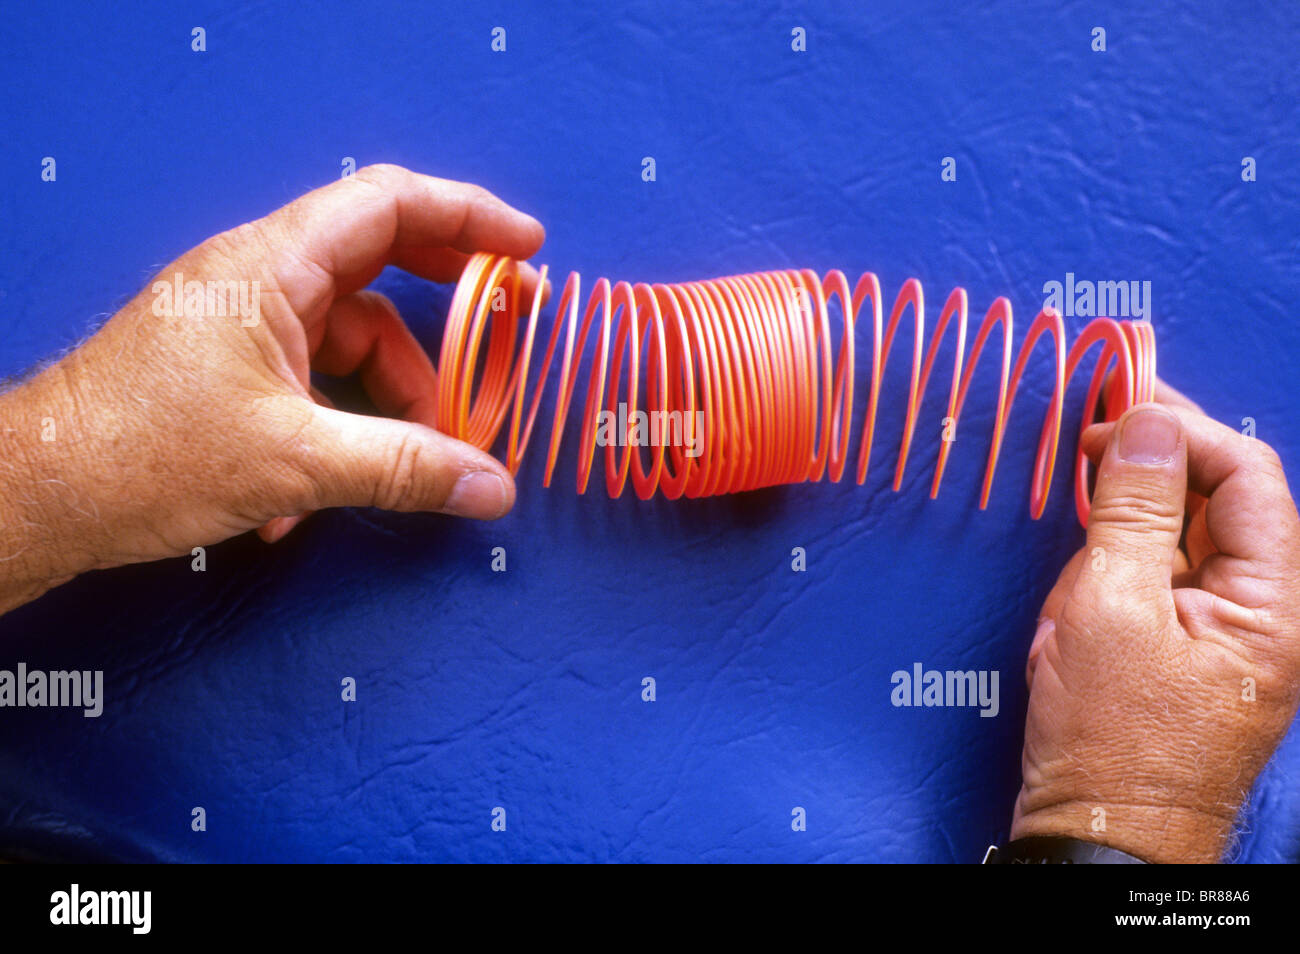 plastic slinky toy spring stretch coil wave effect pulse pattern force energy move science demo experiment Stock Photo